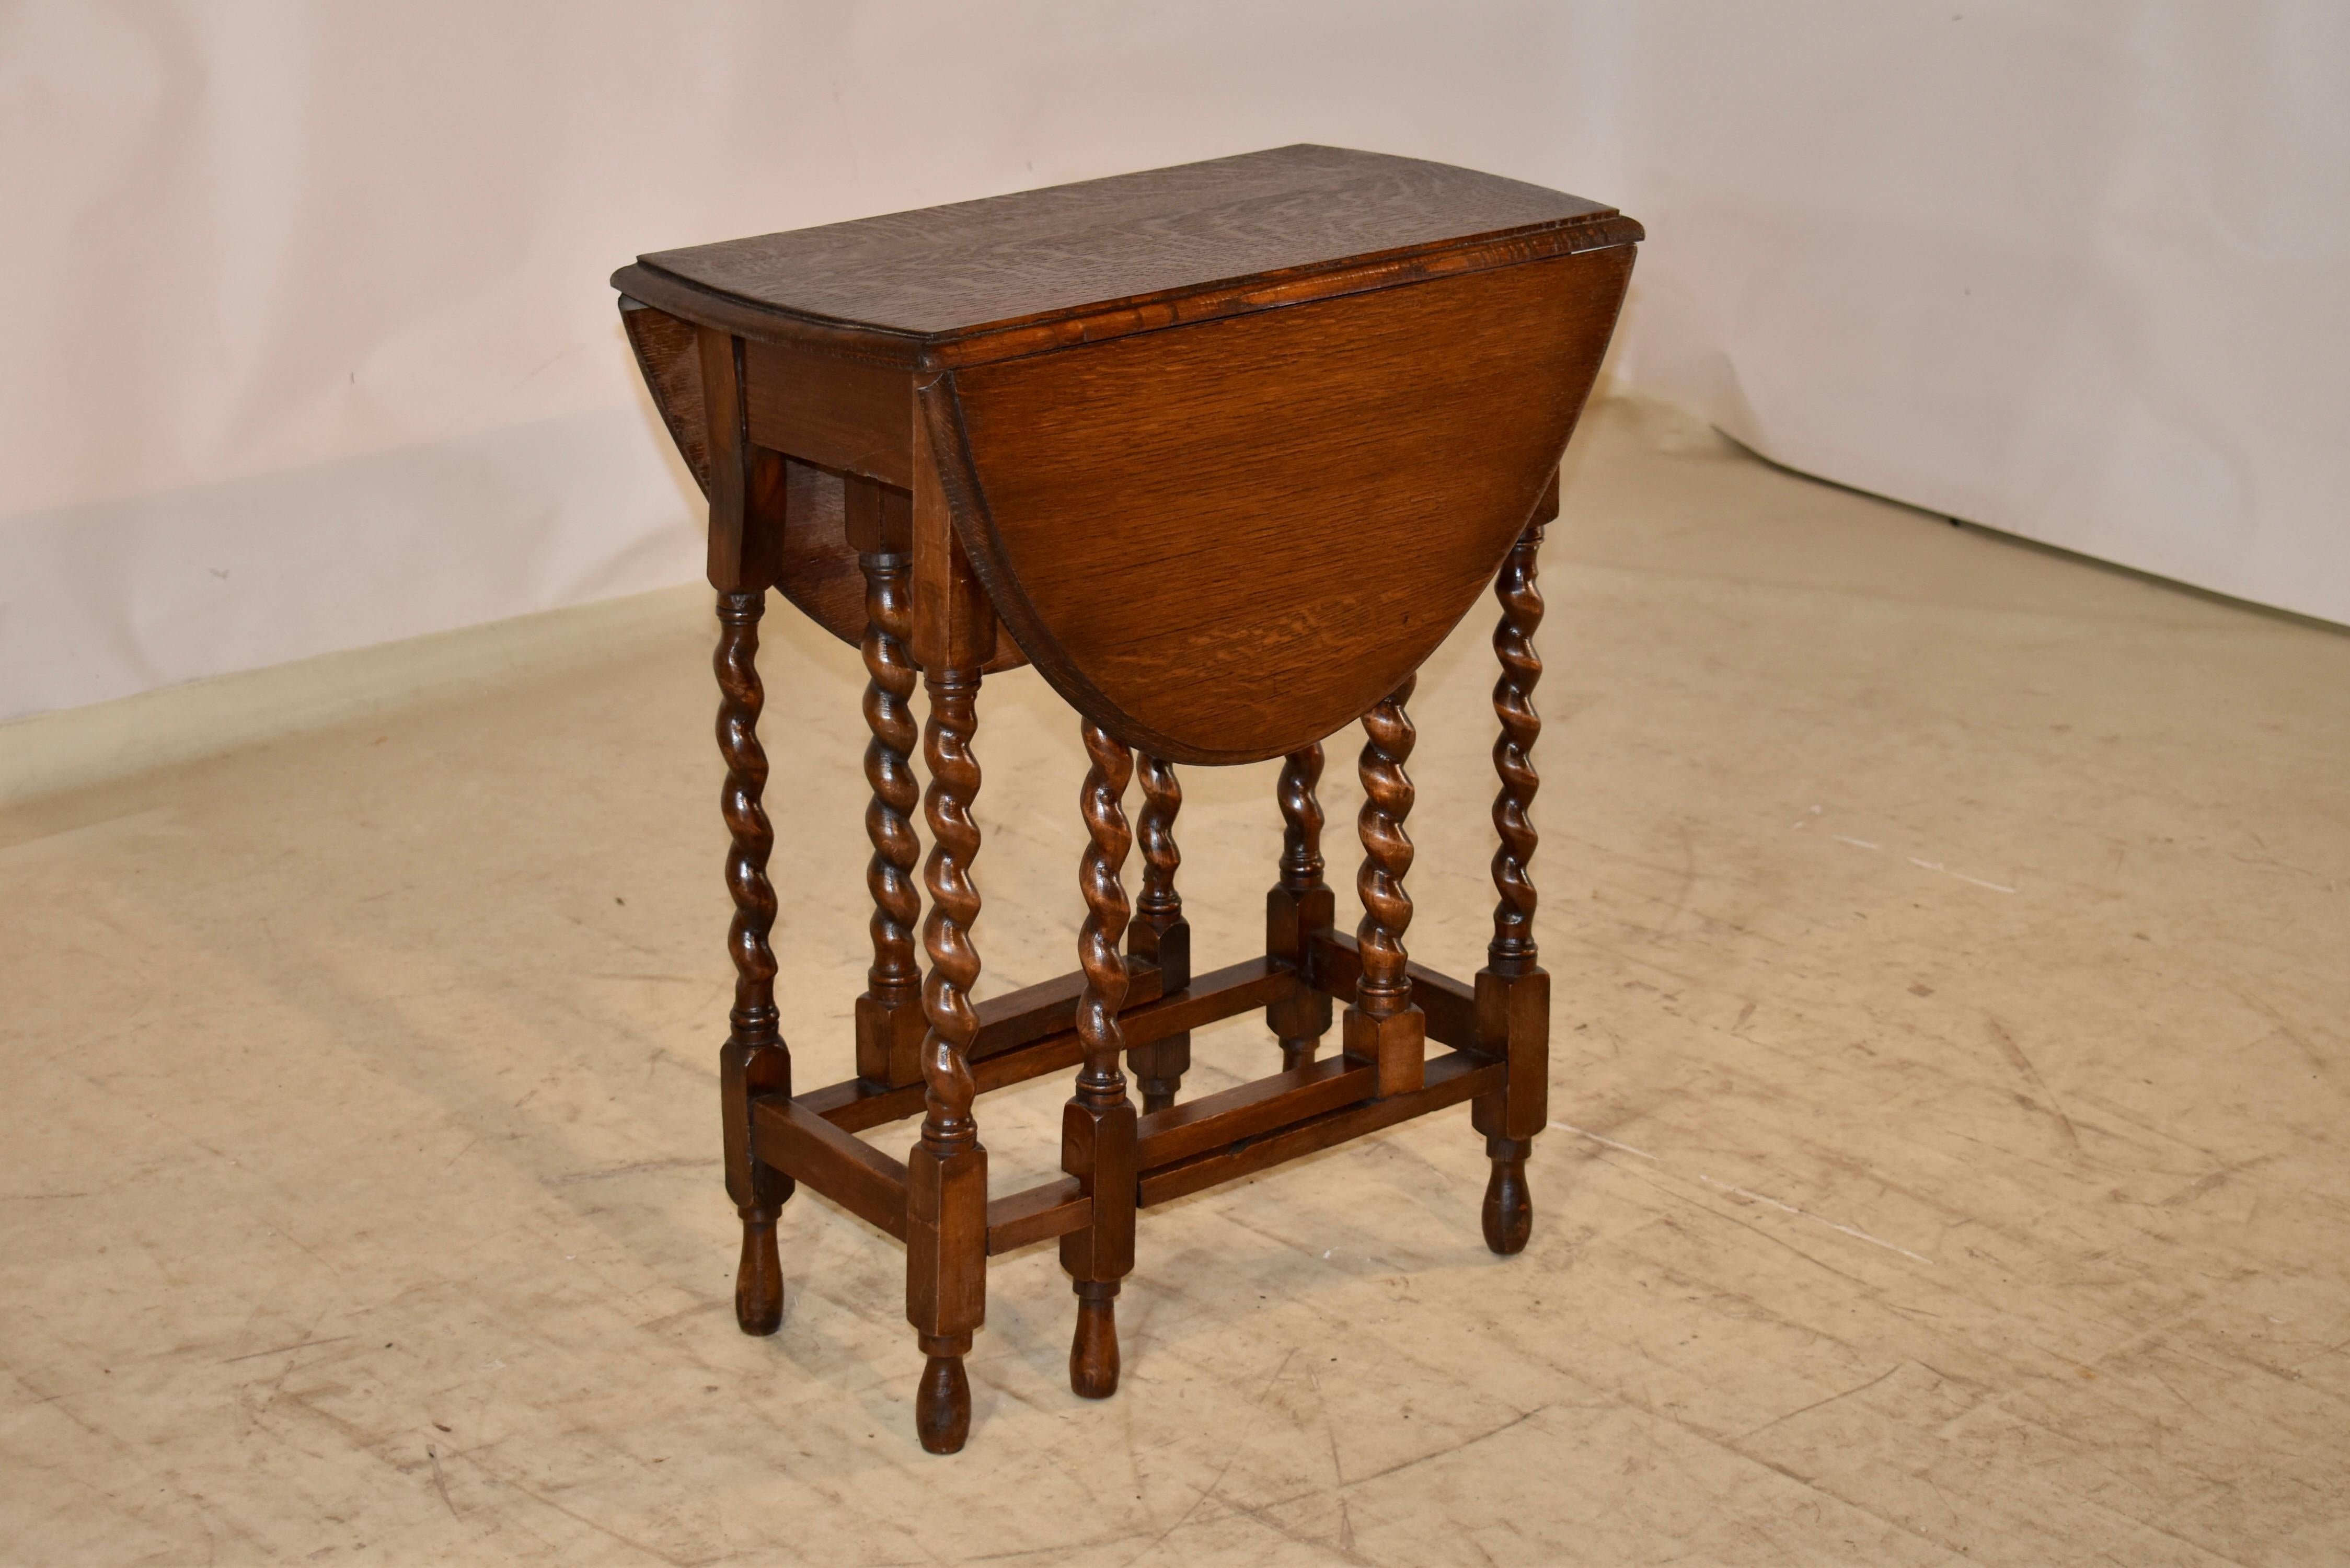 Period Edwardian oak side table with two drop leaves and gate legs which swing out to increase the size of the table to 35.25 inches in length when fully opened.  The top has a lovely beveled edge and follows down to a simple apron and is supported